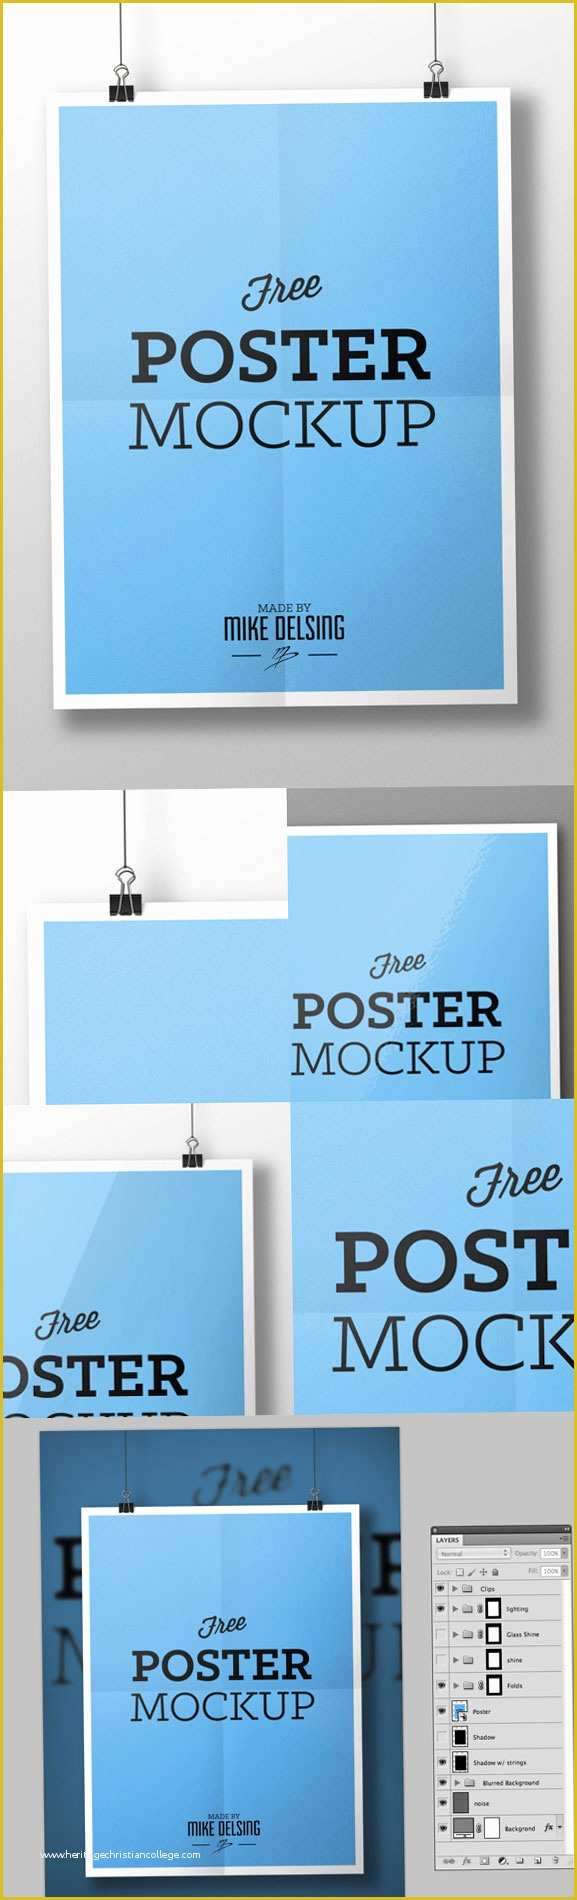 Free Photoshop Flyer Templates Of Psd Poster Mockup Shop Psd